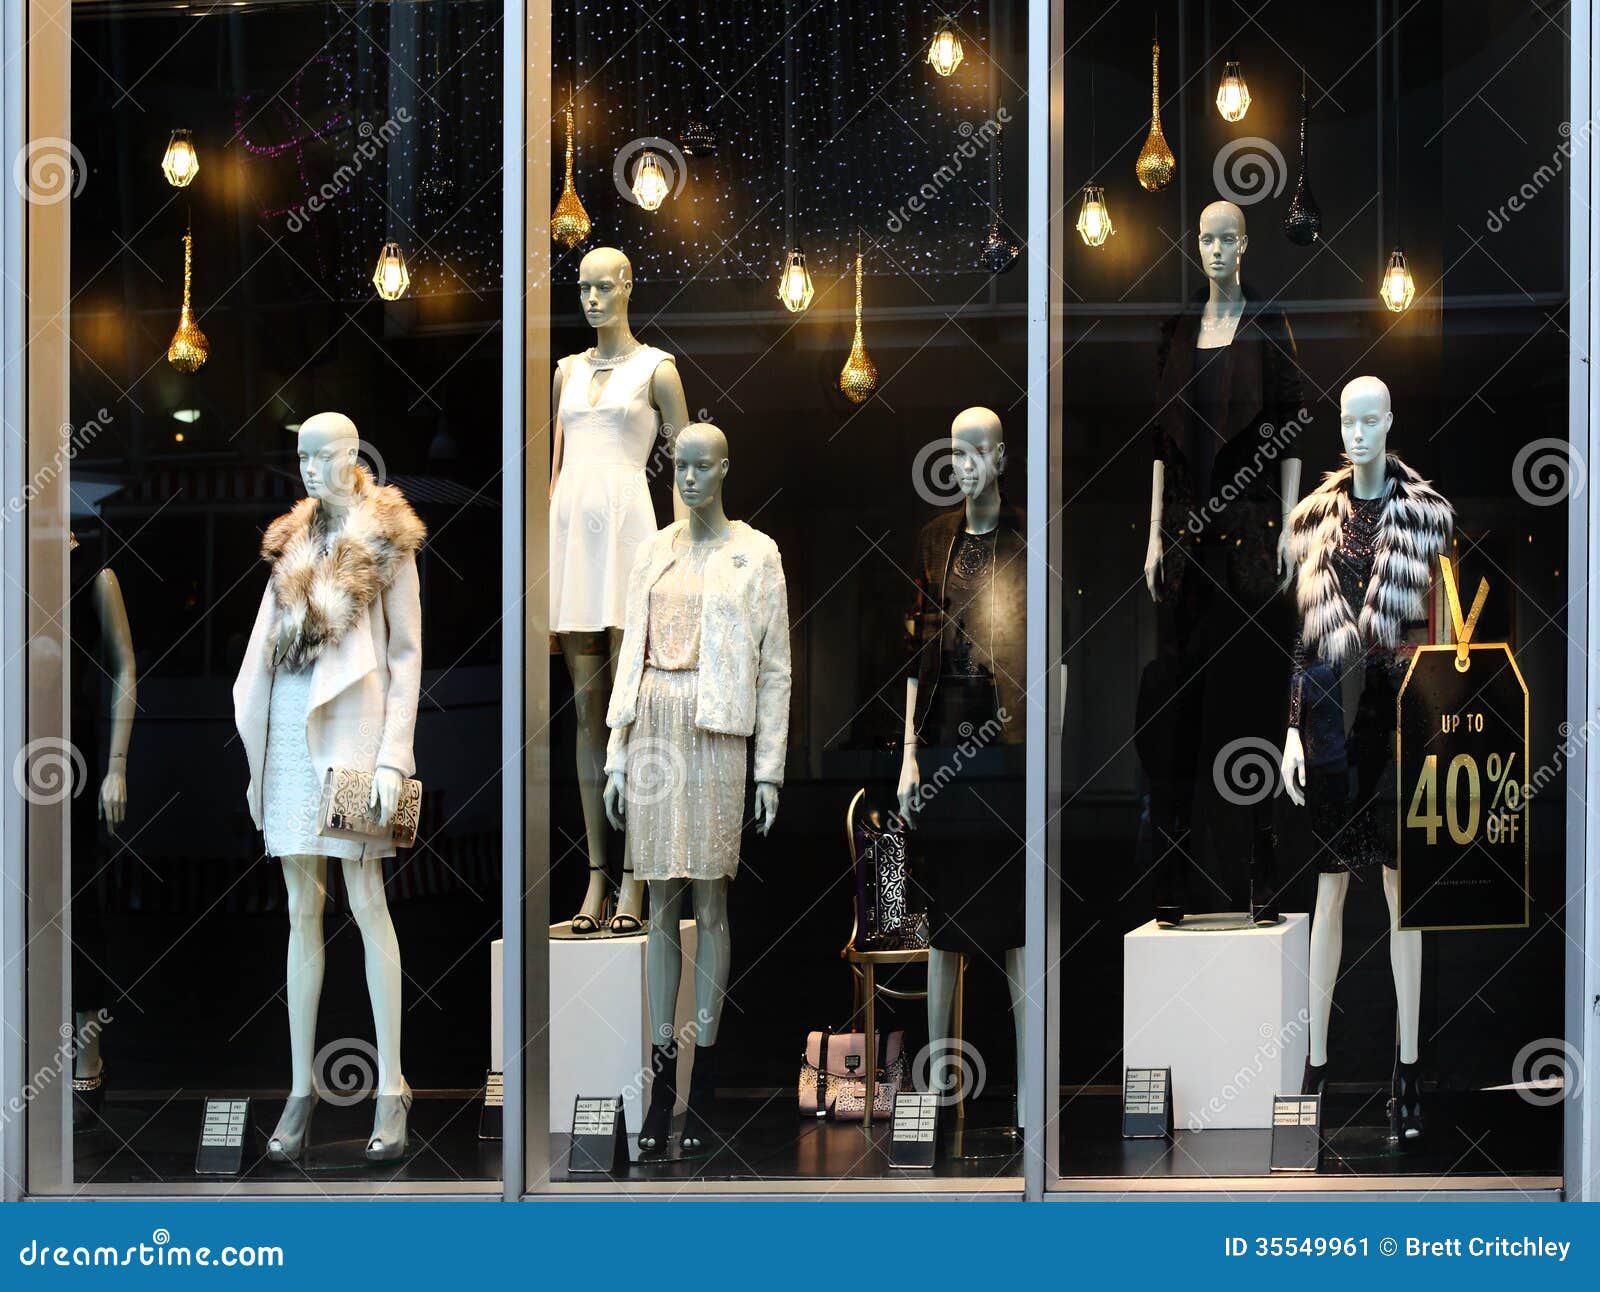 retail store window with mannequins